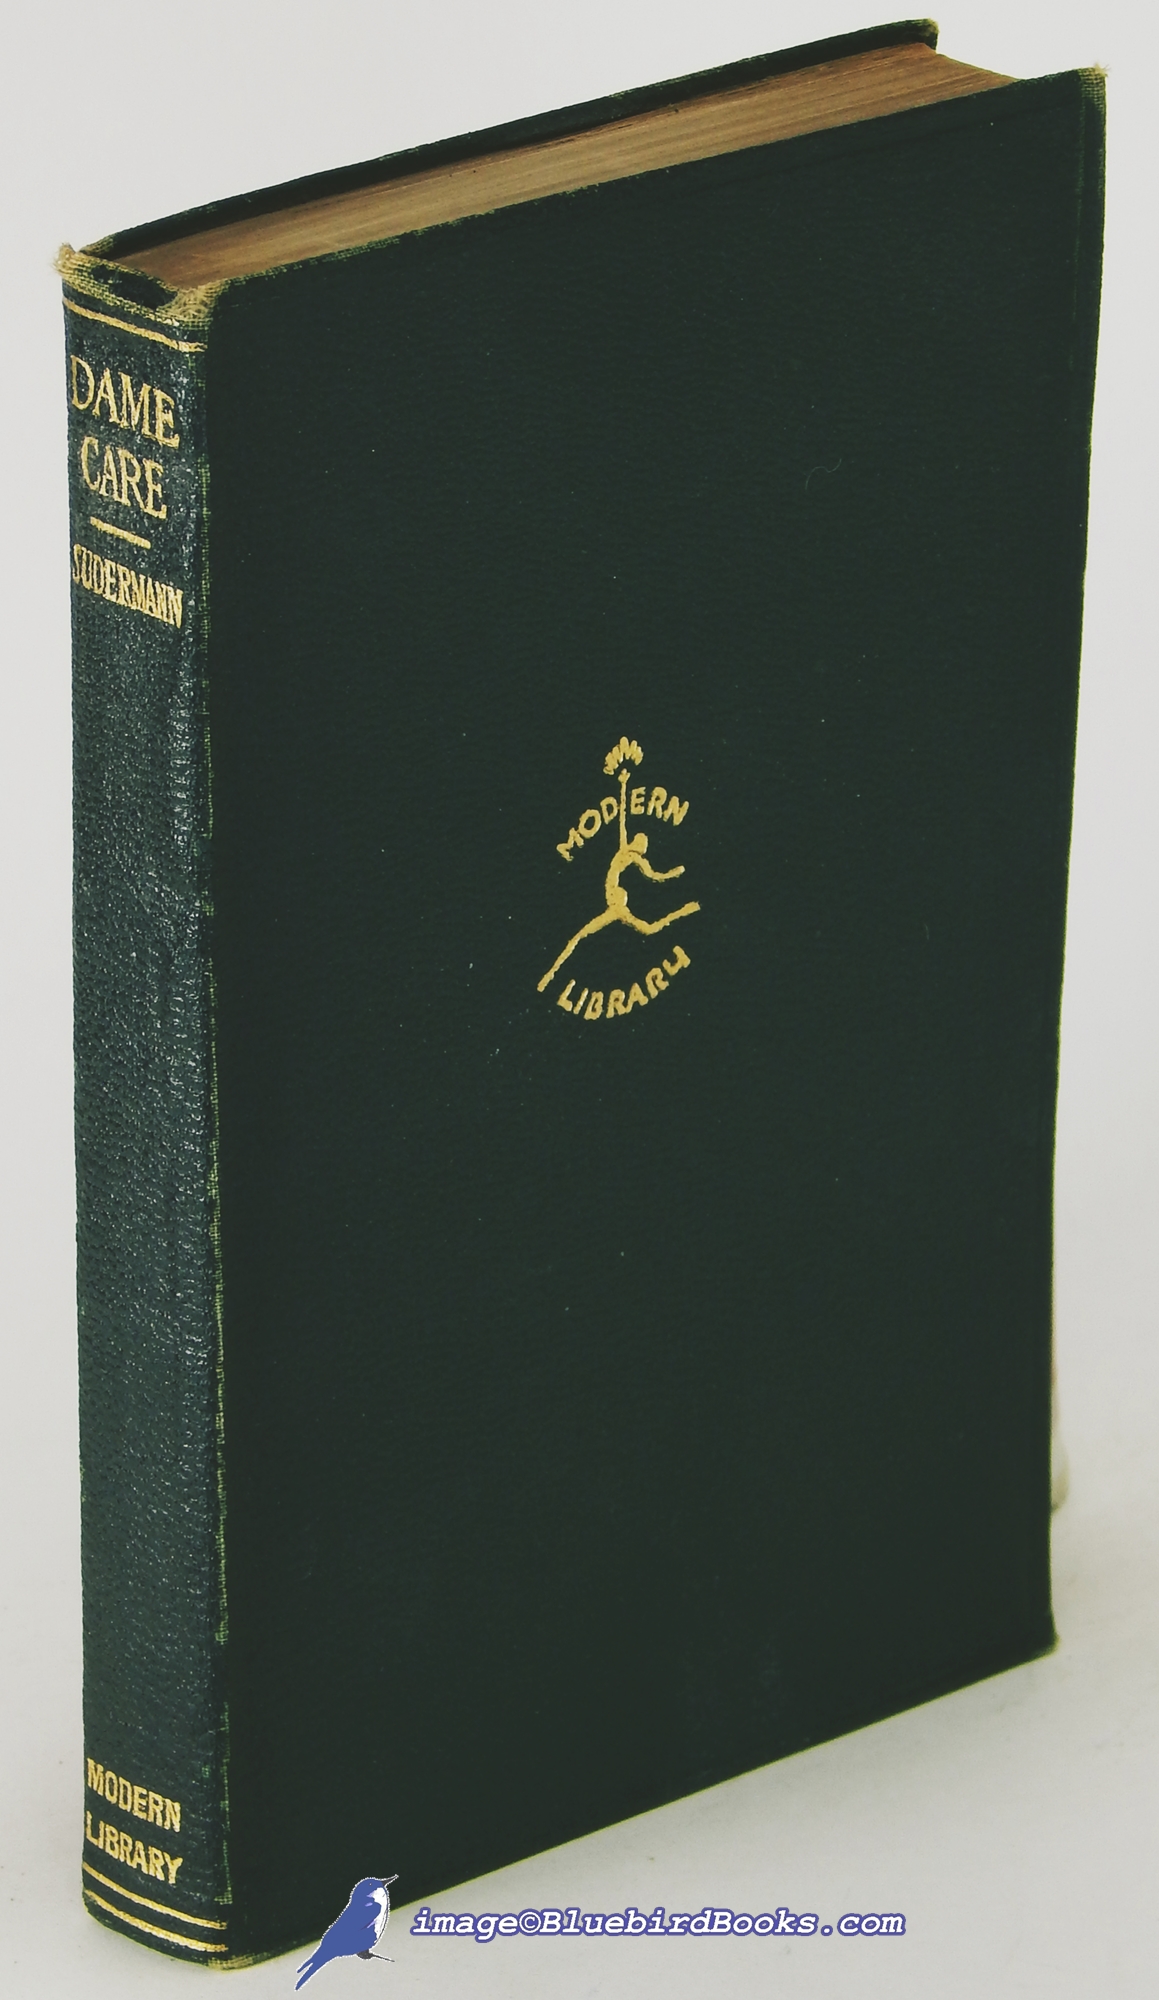 MEREDITH, GEORGE - Diana of the Crossways (Modern Library Spine 4, ML #14. 1)